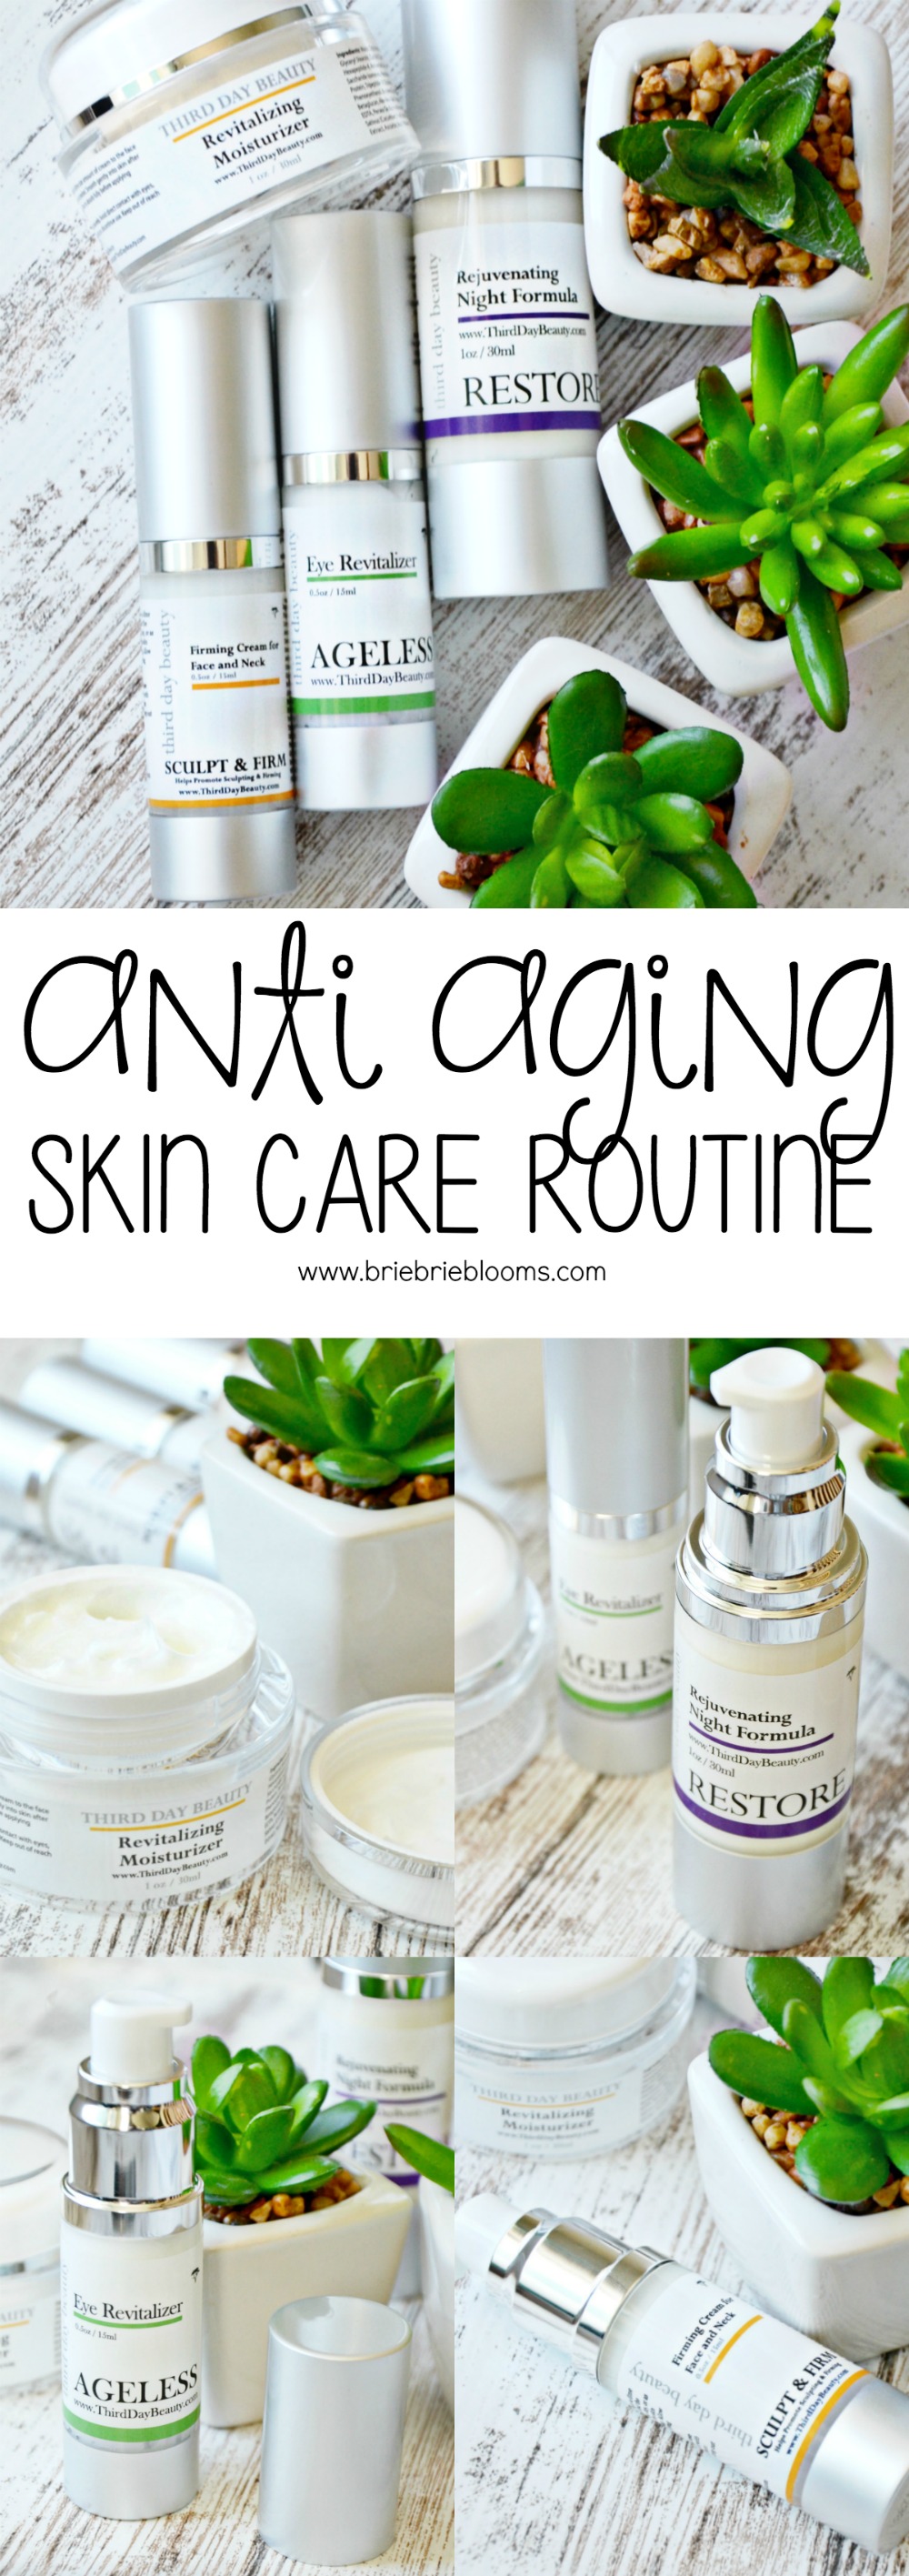 Use products with high quality ingredients for your anti aging skin care routine.